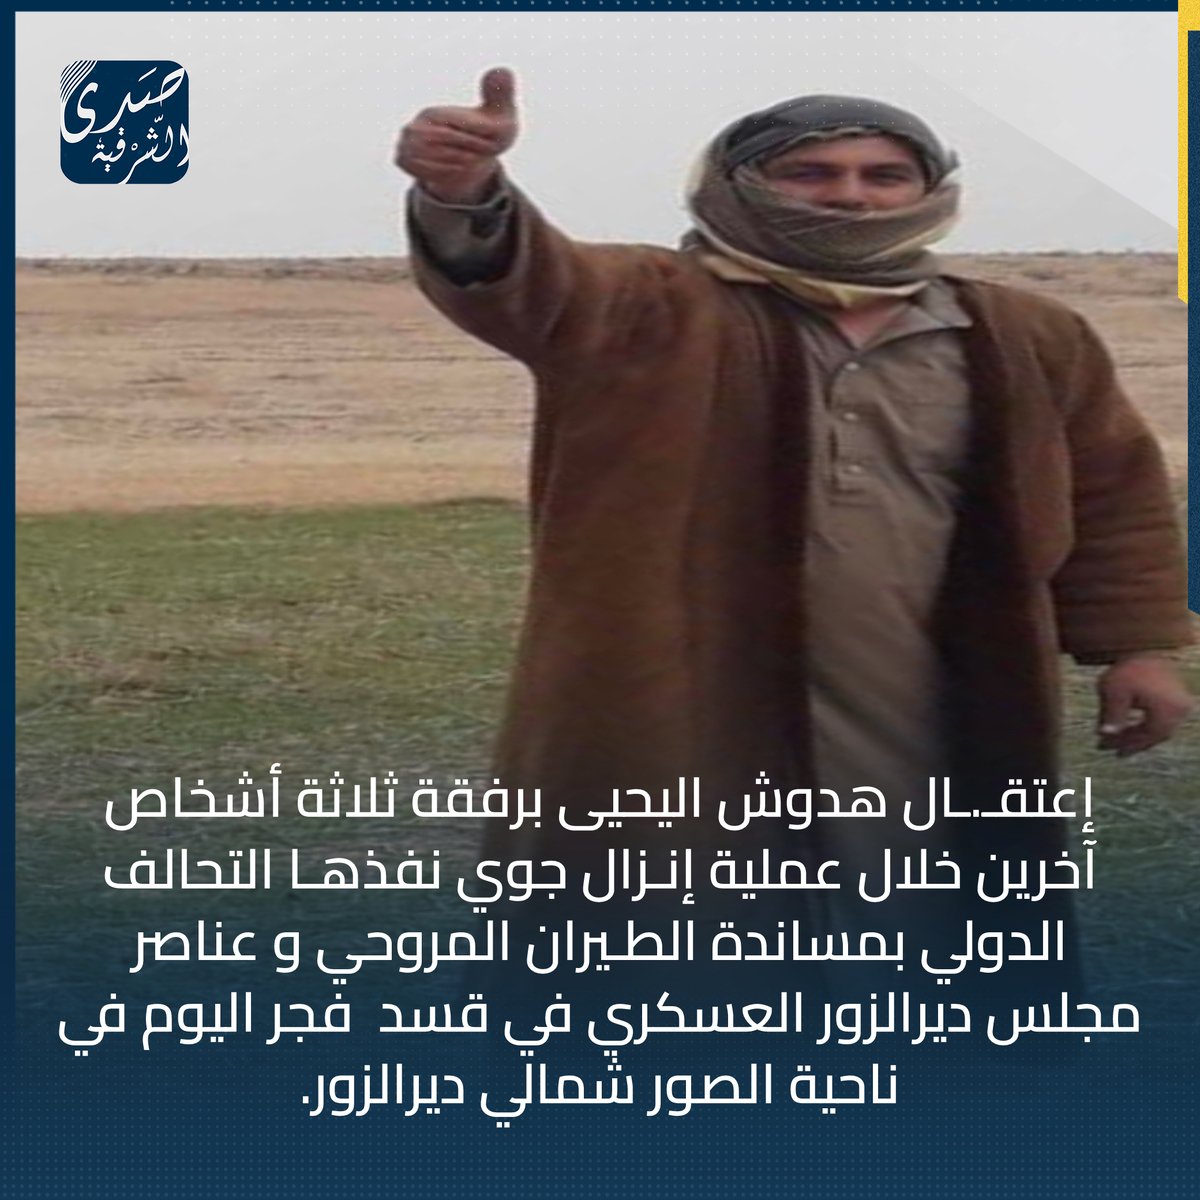 The Hadush al-Yahya family was arrested, along with three other persons, during an airdrop operation carried out by the International Coalition with the support of helicopters and SDF at around 2:00 am today in Al-Sour district, north of Deir Ezzor. Clashes took place between the two parties, with one person and an SDF member being injured